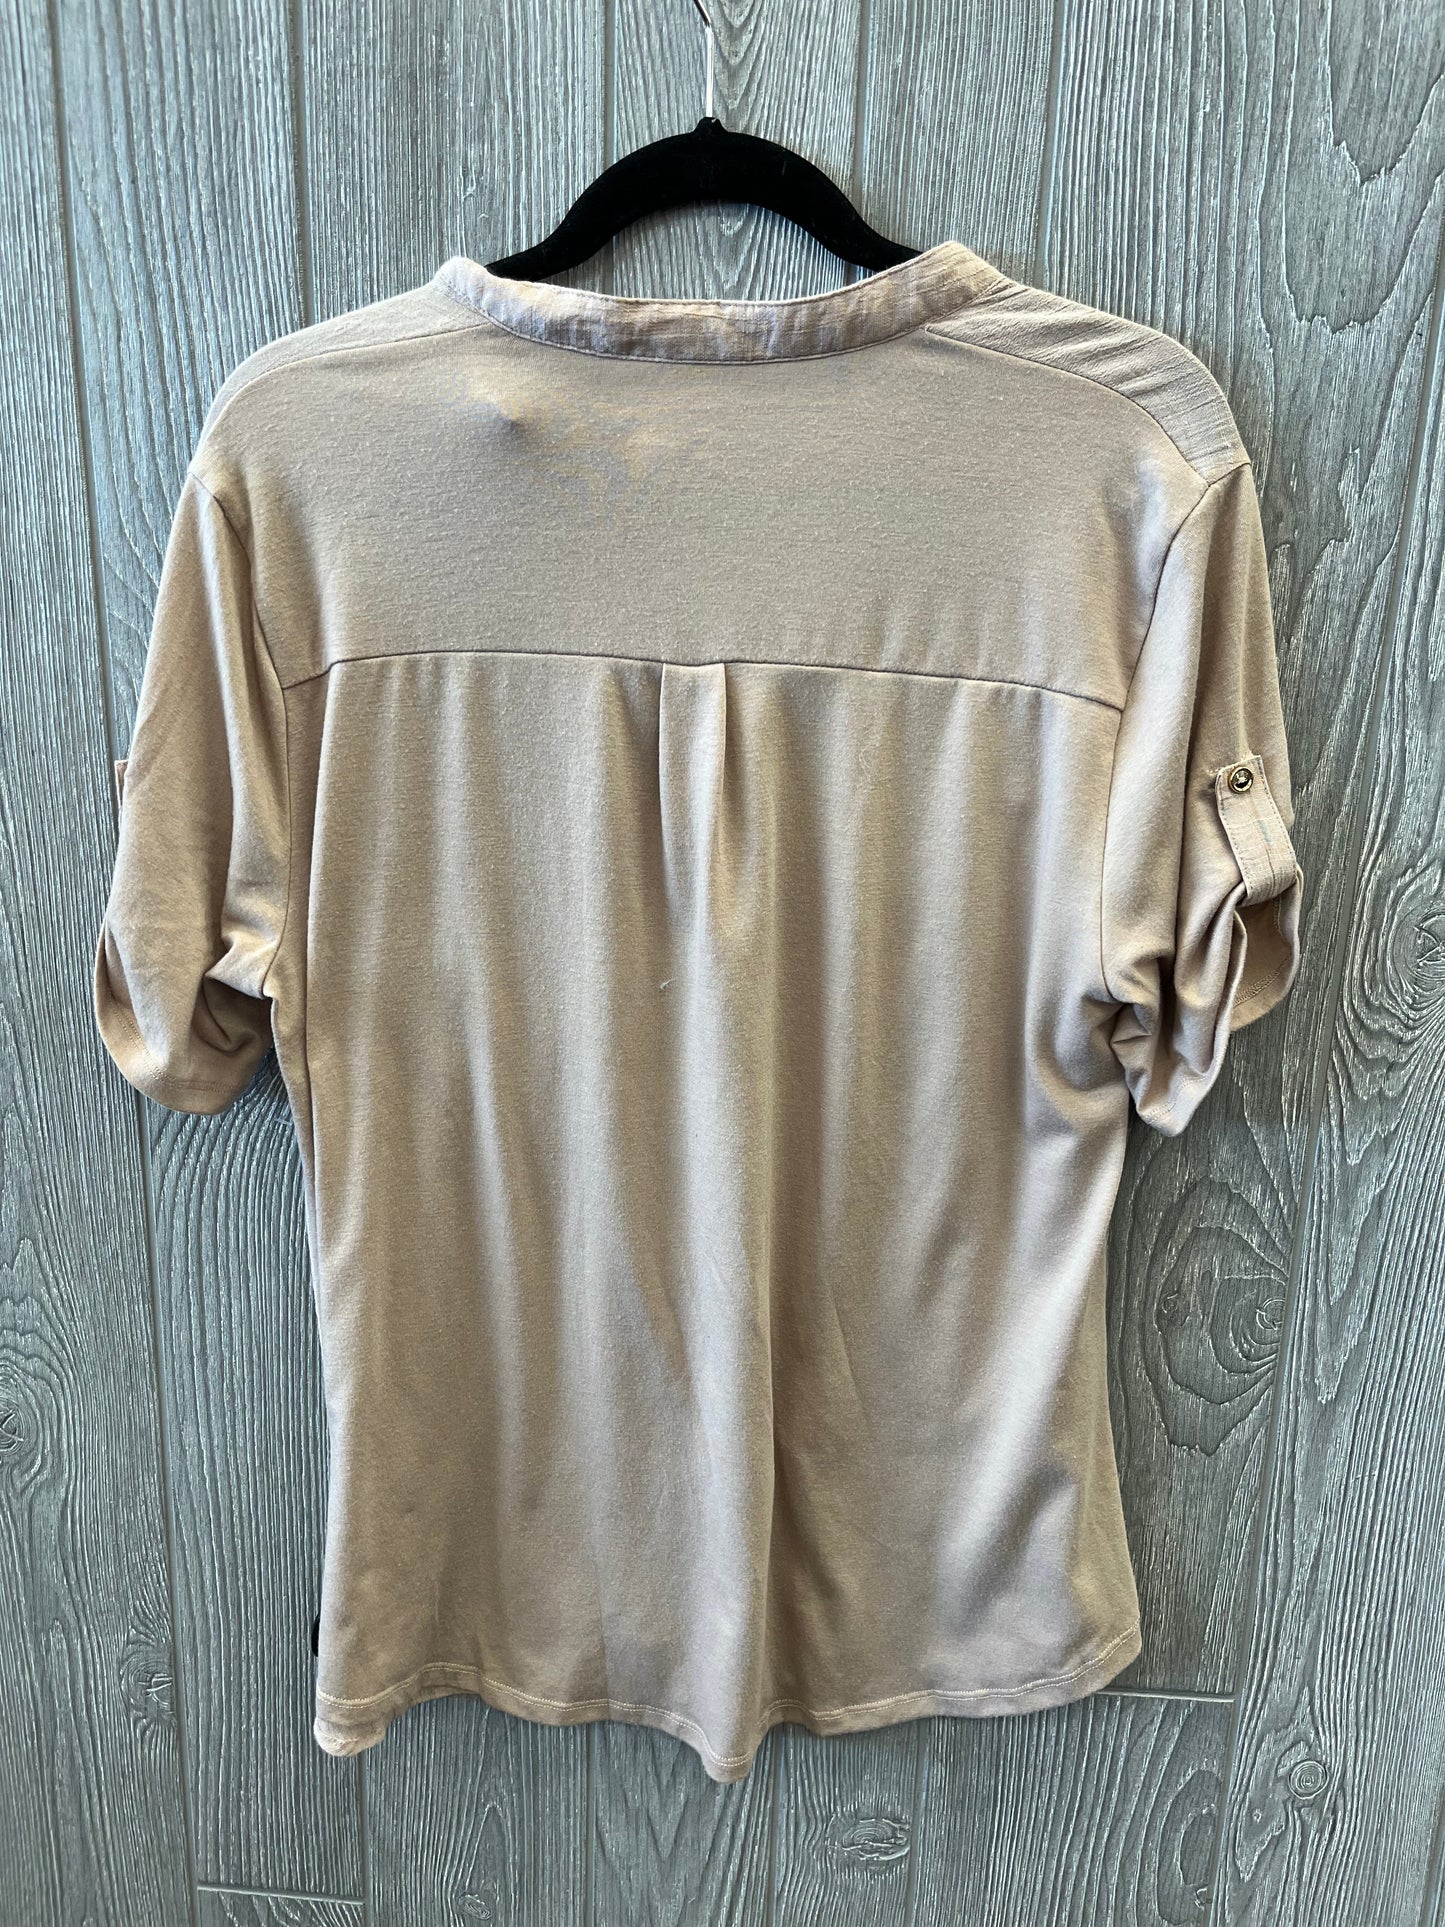 Brown Top Short Sleeve Clothes Mentor, Size Xl